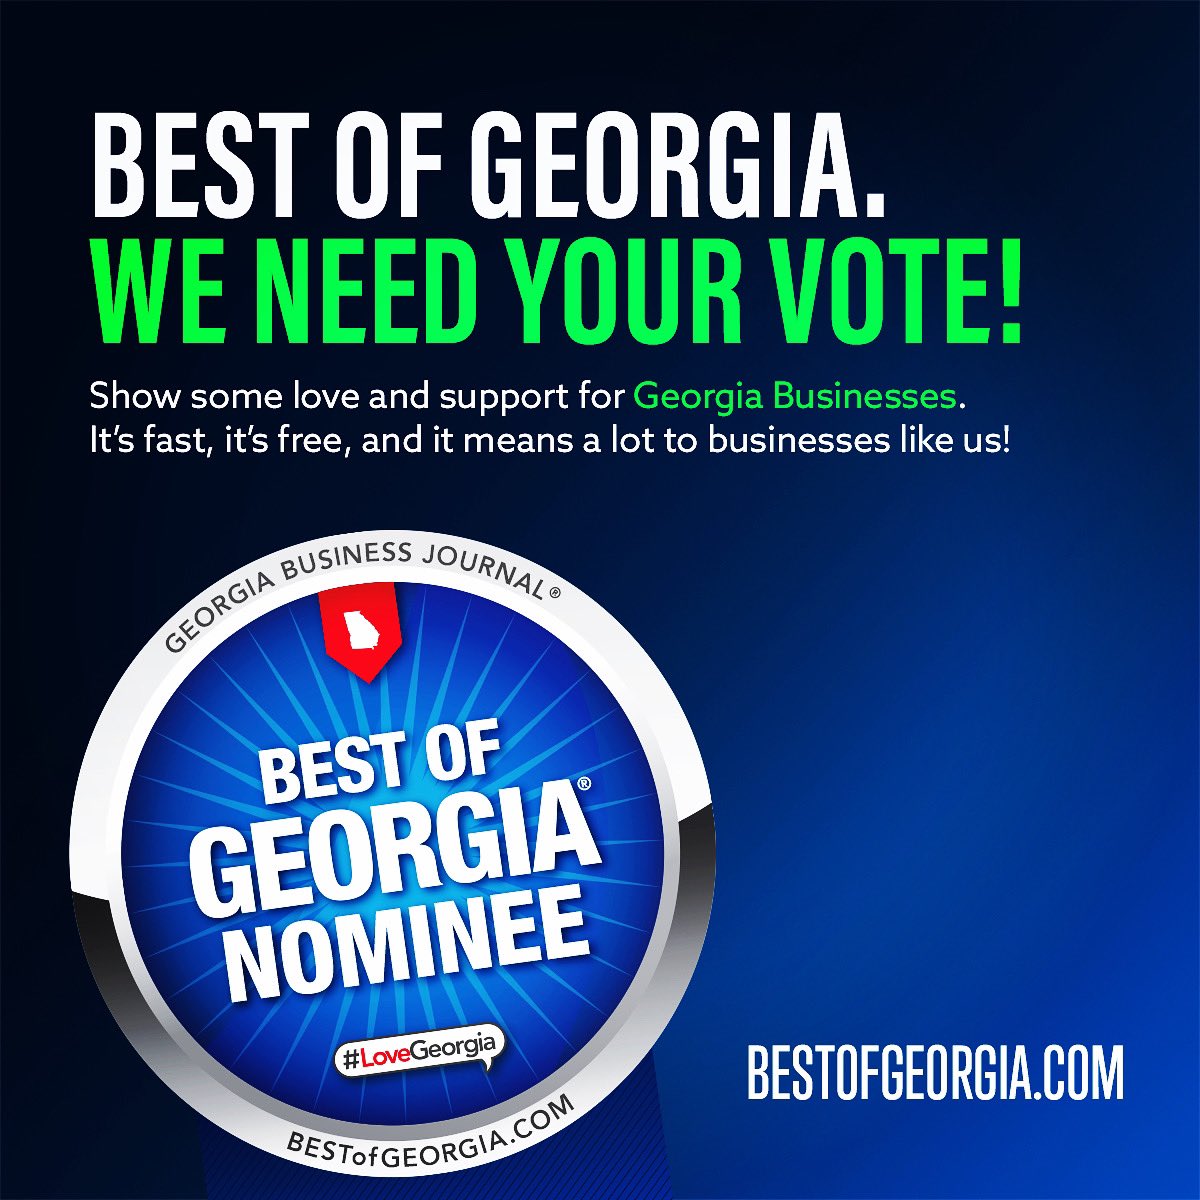 Have you voted today for@ceg_bakery_official ? #maydessertbewithyou #atl #atlanta #bestofgeorgia #atlfood #atlfoodie #blackownedbusiness #atlbaker #atlbakery